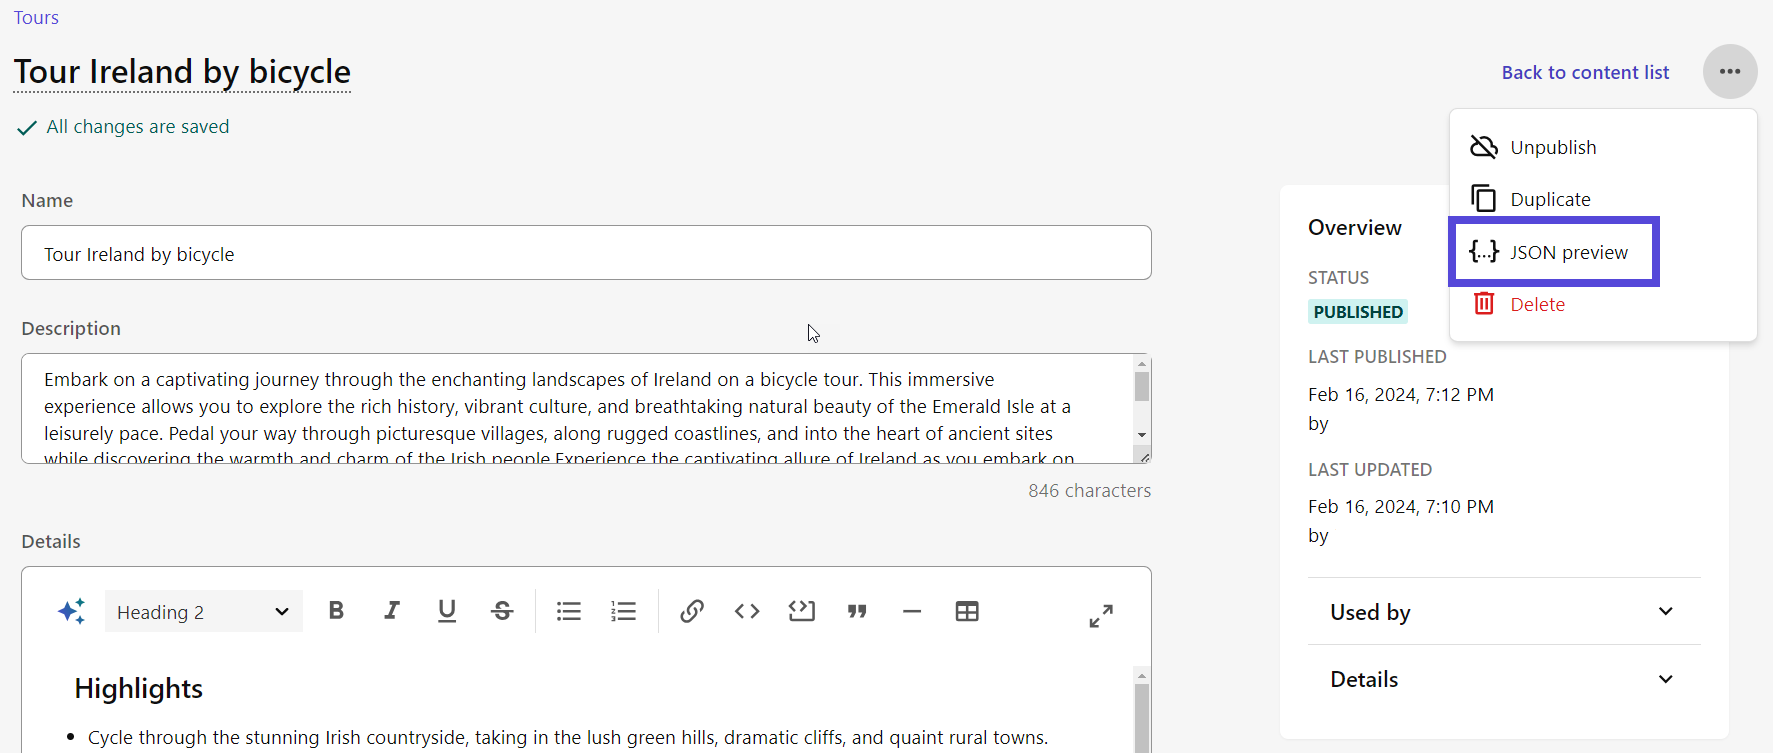 Streamlined interface for editing detail pages